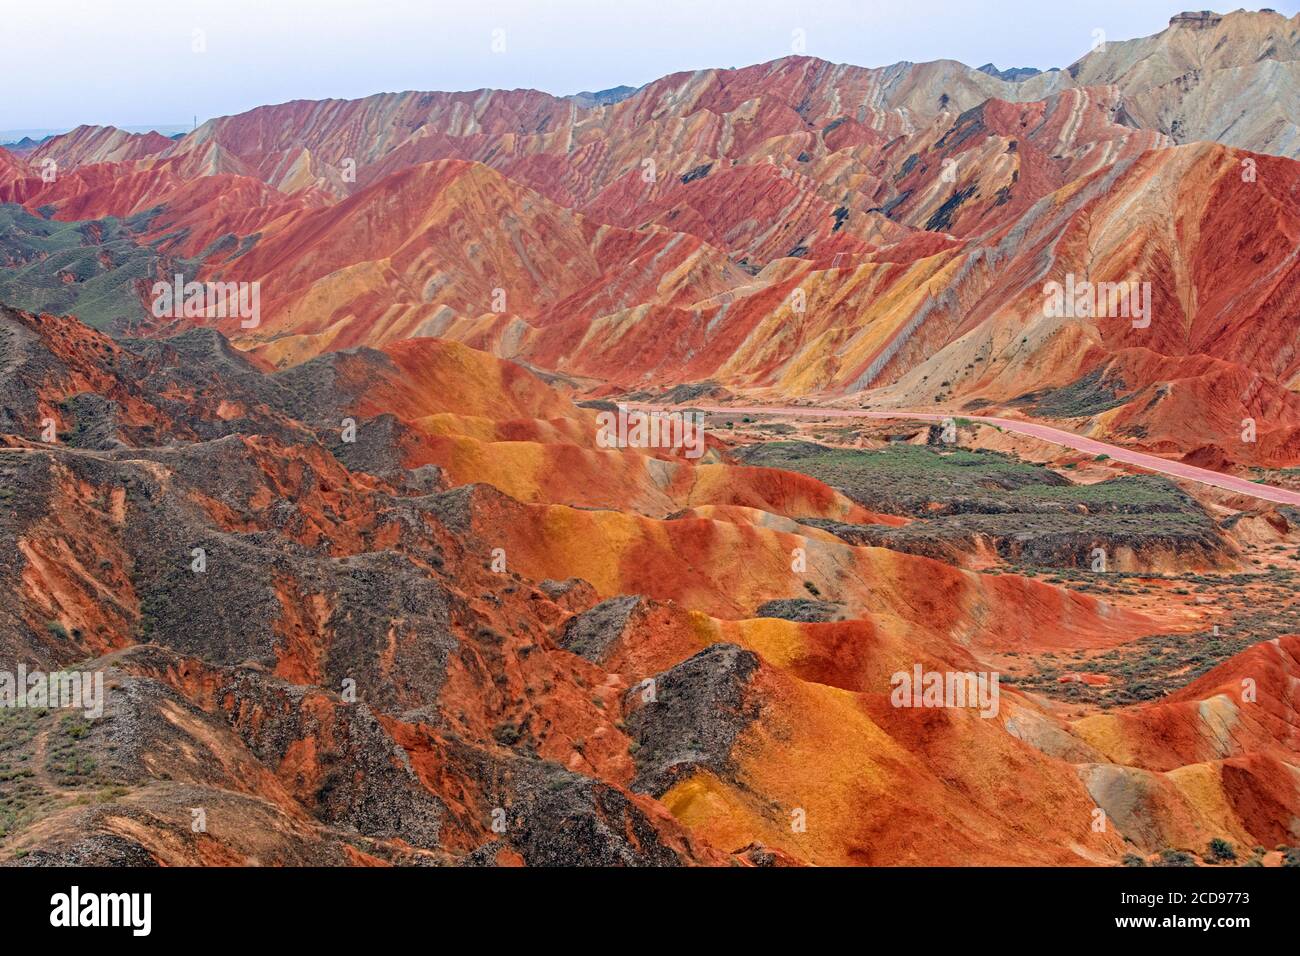 Colourful badlands in the Zhangye National Geopark / Zhangye Danxia Geopark in the northern foothills of the Qilian Mountains, Gansu Province, China Stock Photo